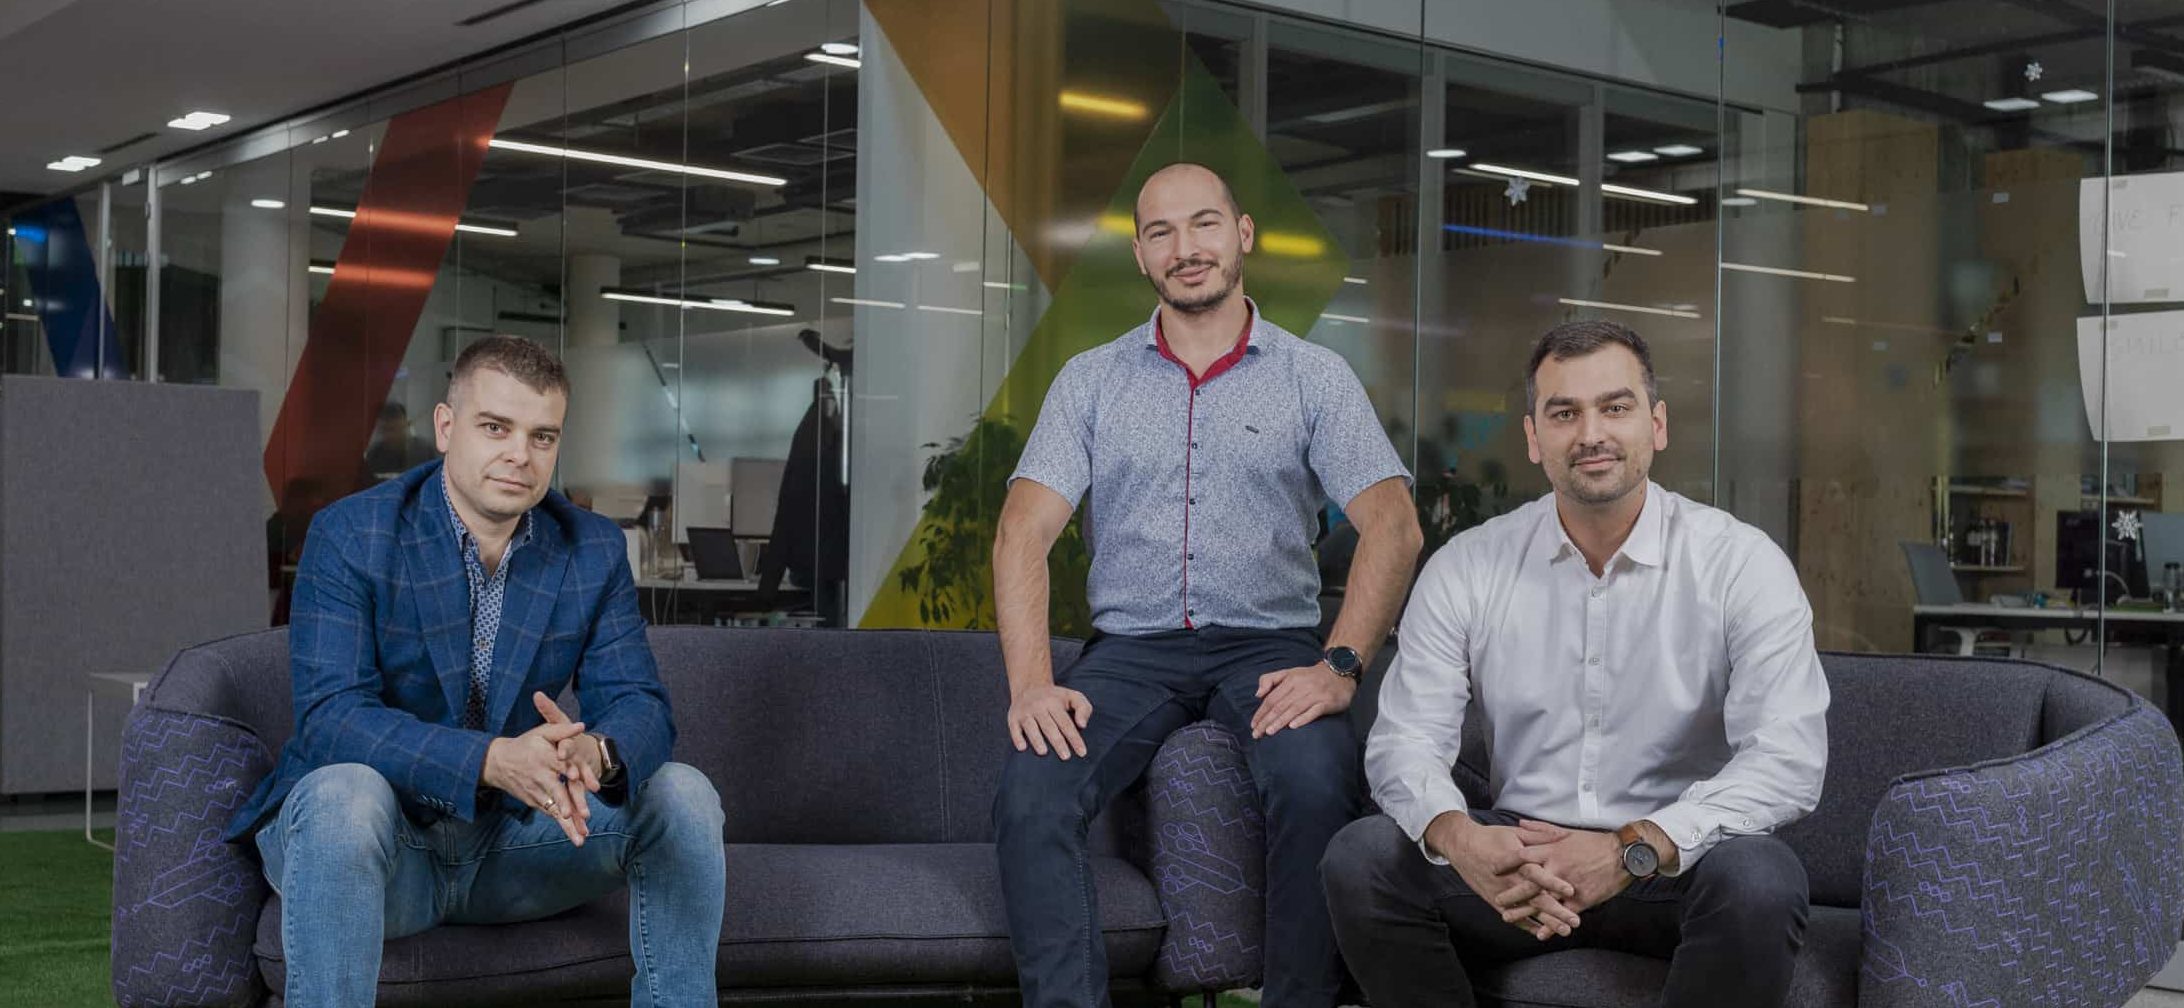 Payhawk secures £83.7 million Series B investment led by Greenoaks